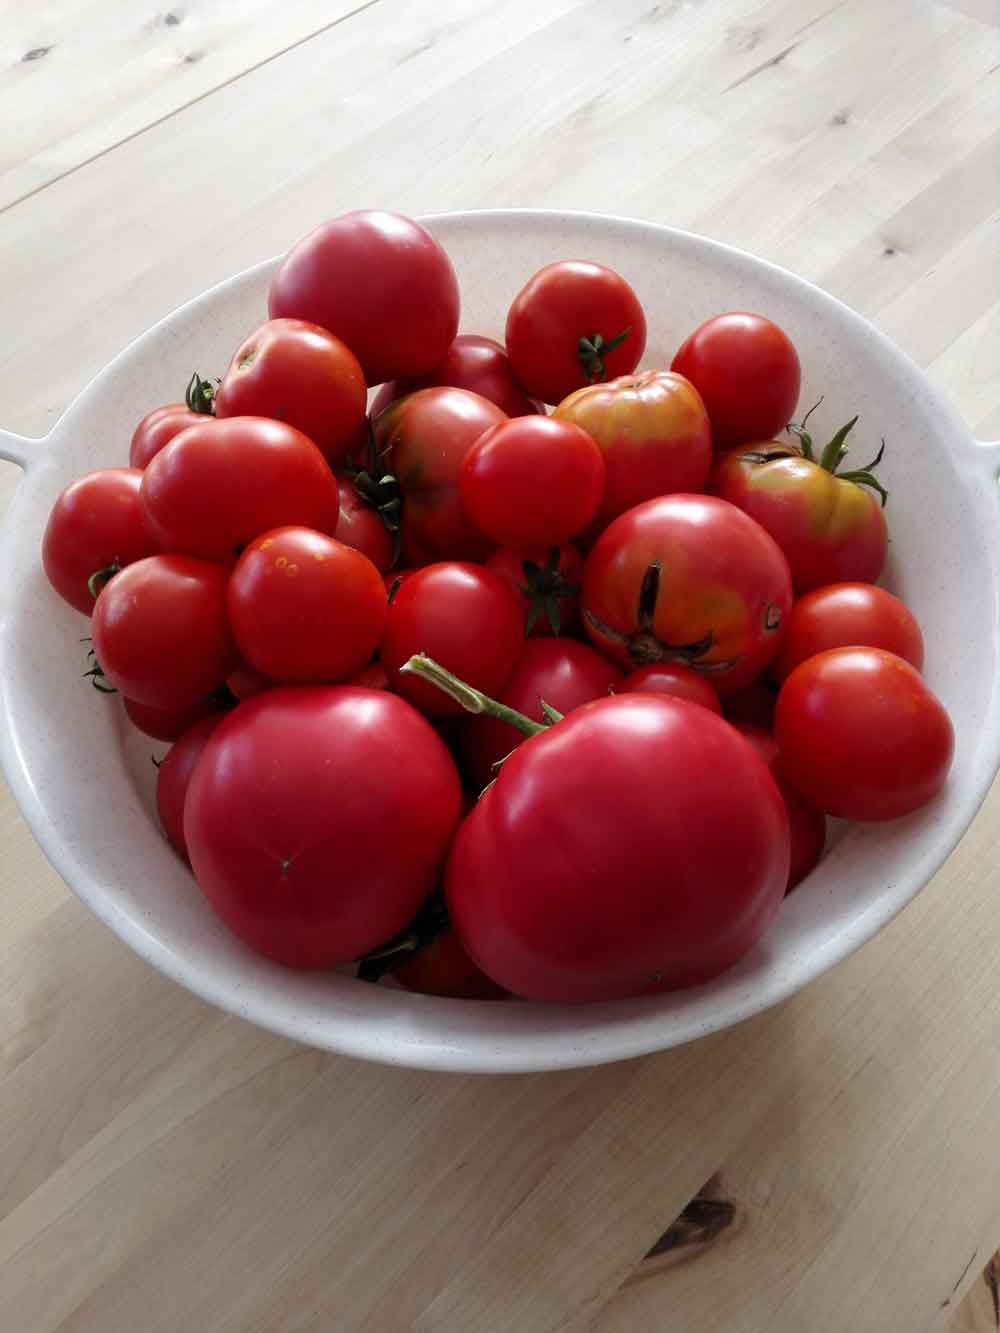 You are currently viewing Tomatenernte